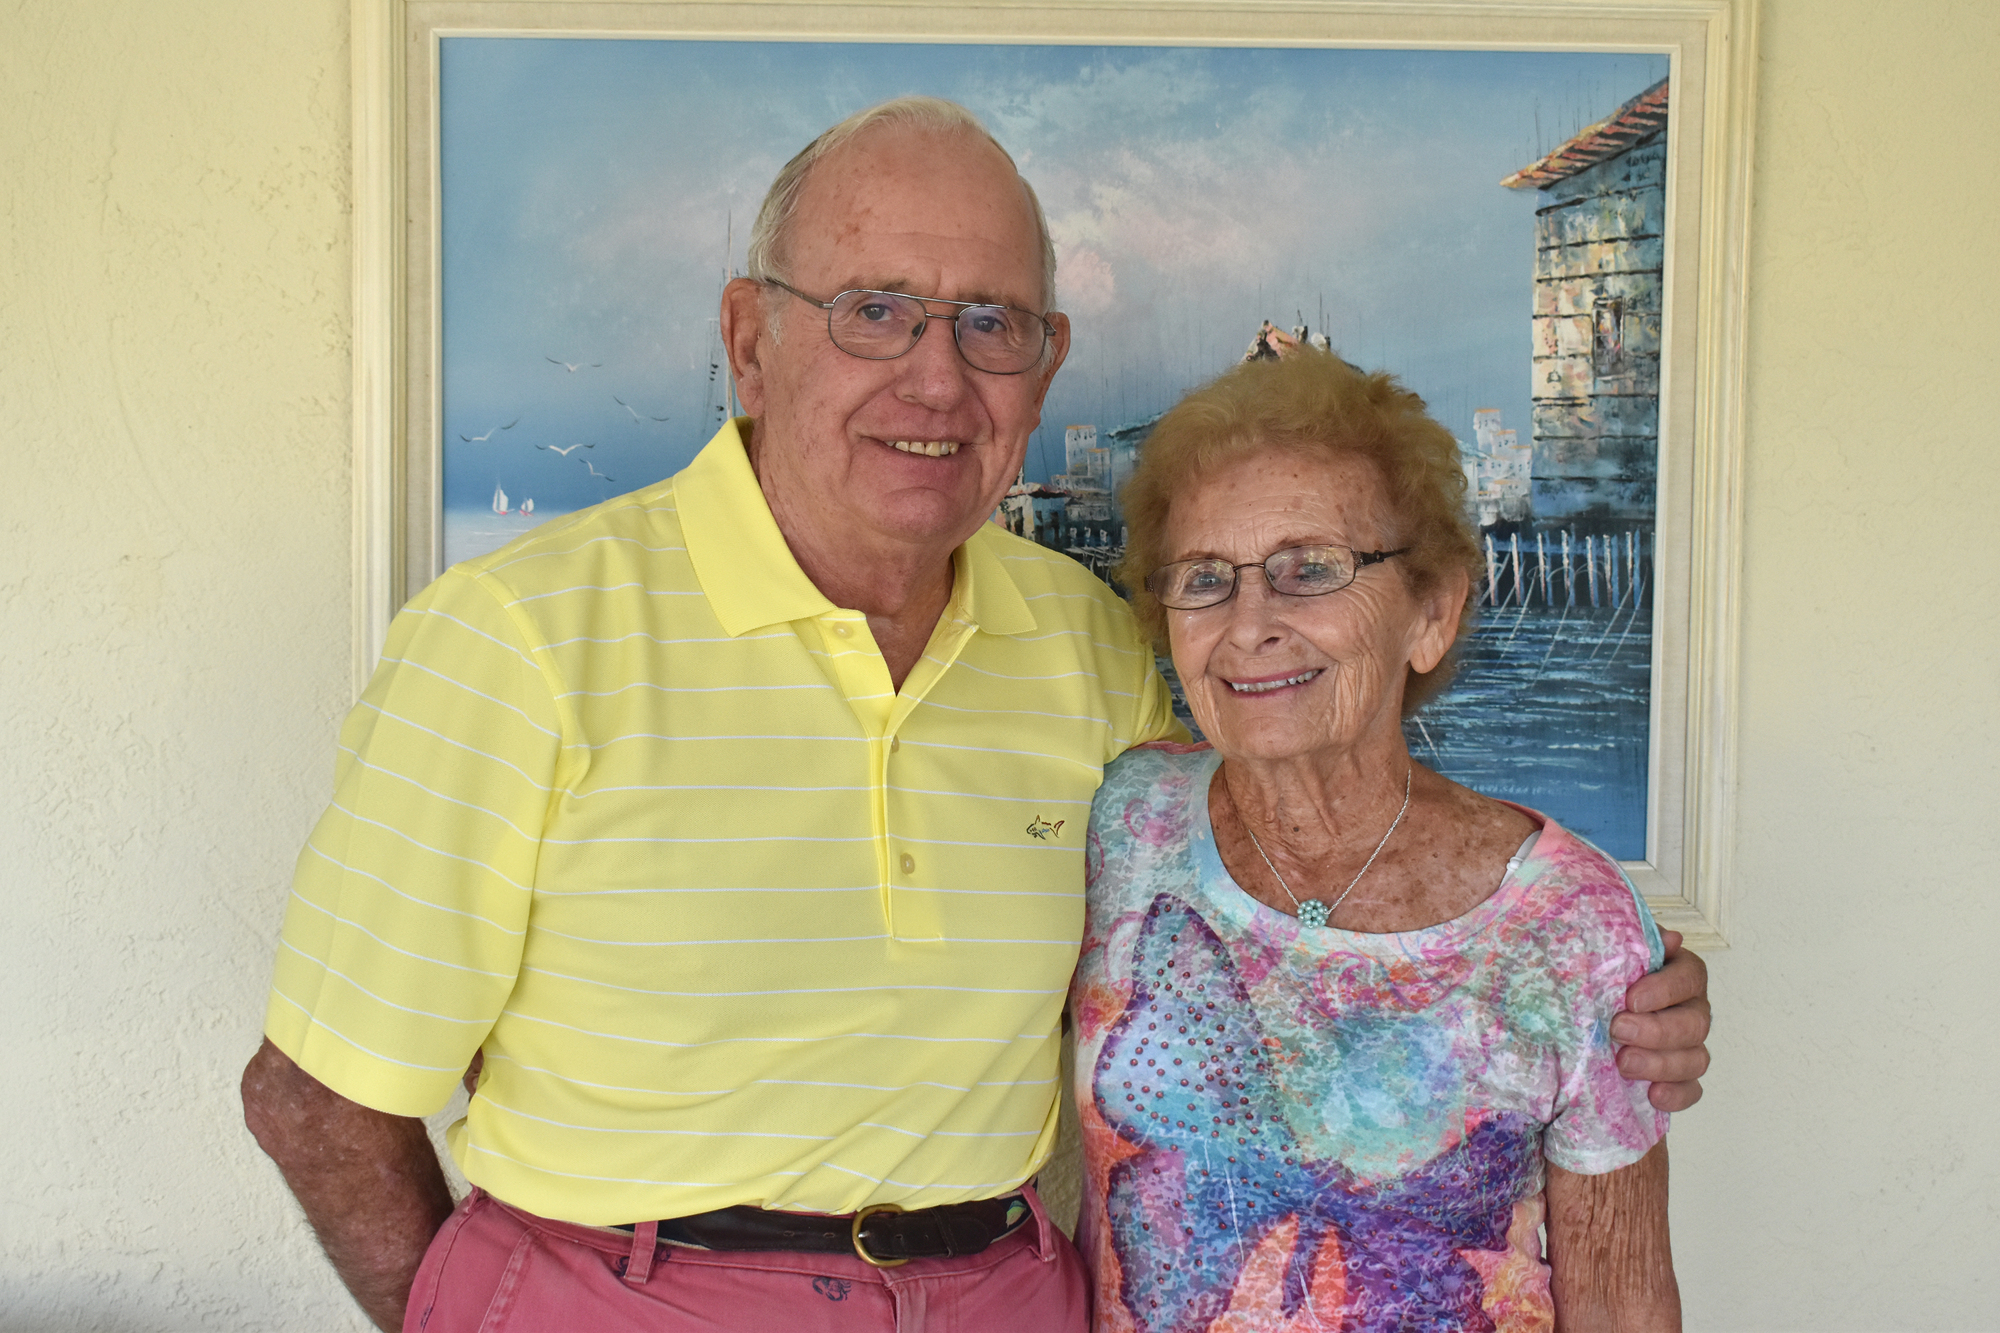 Cash and Snookie Register will be married 58 years in November.